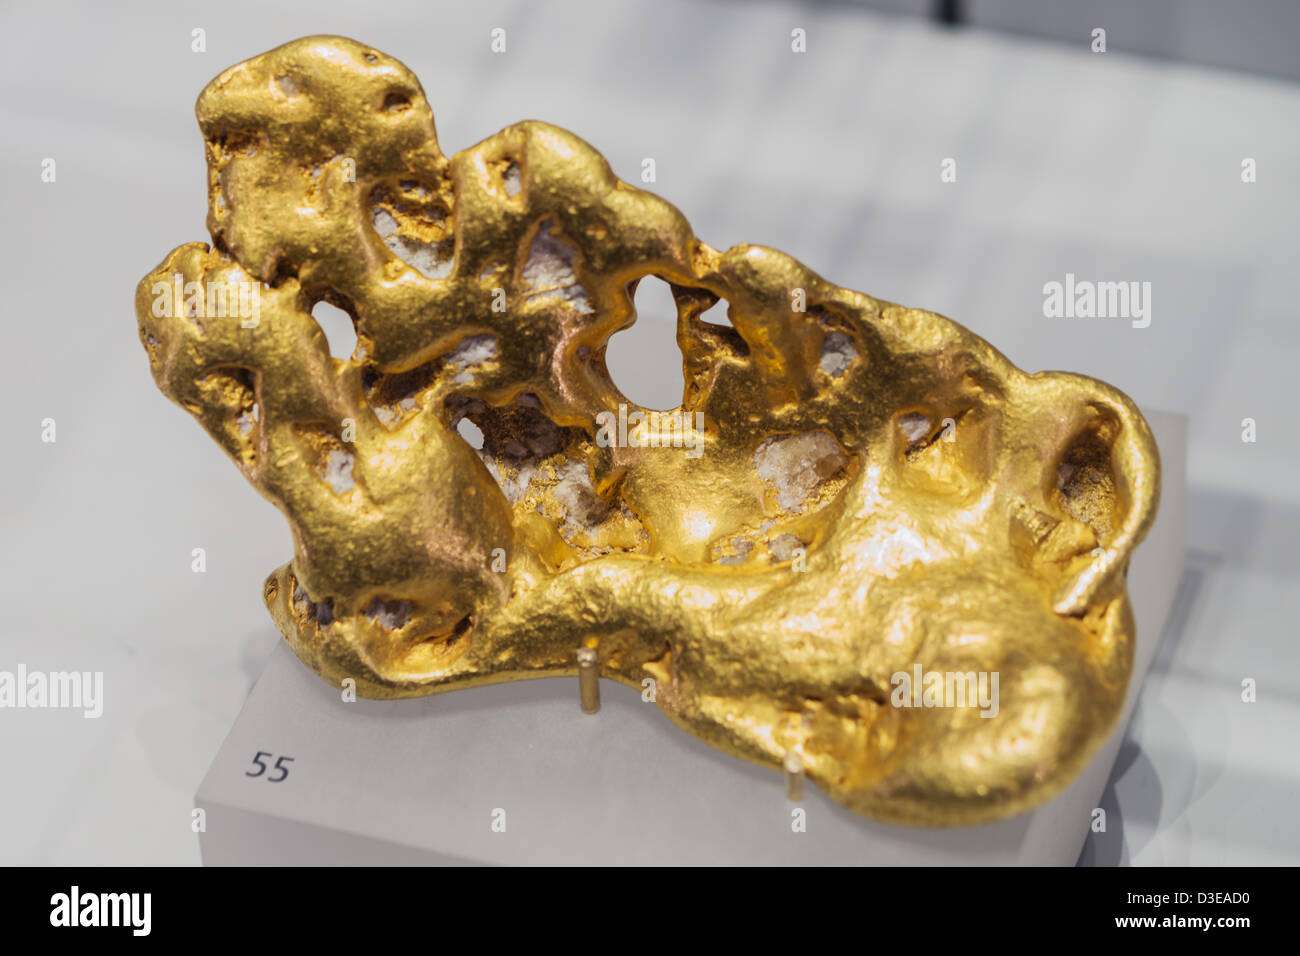 This is a large gold nugget on display at the Royal Ontario Museum, Canada Stock Photo